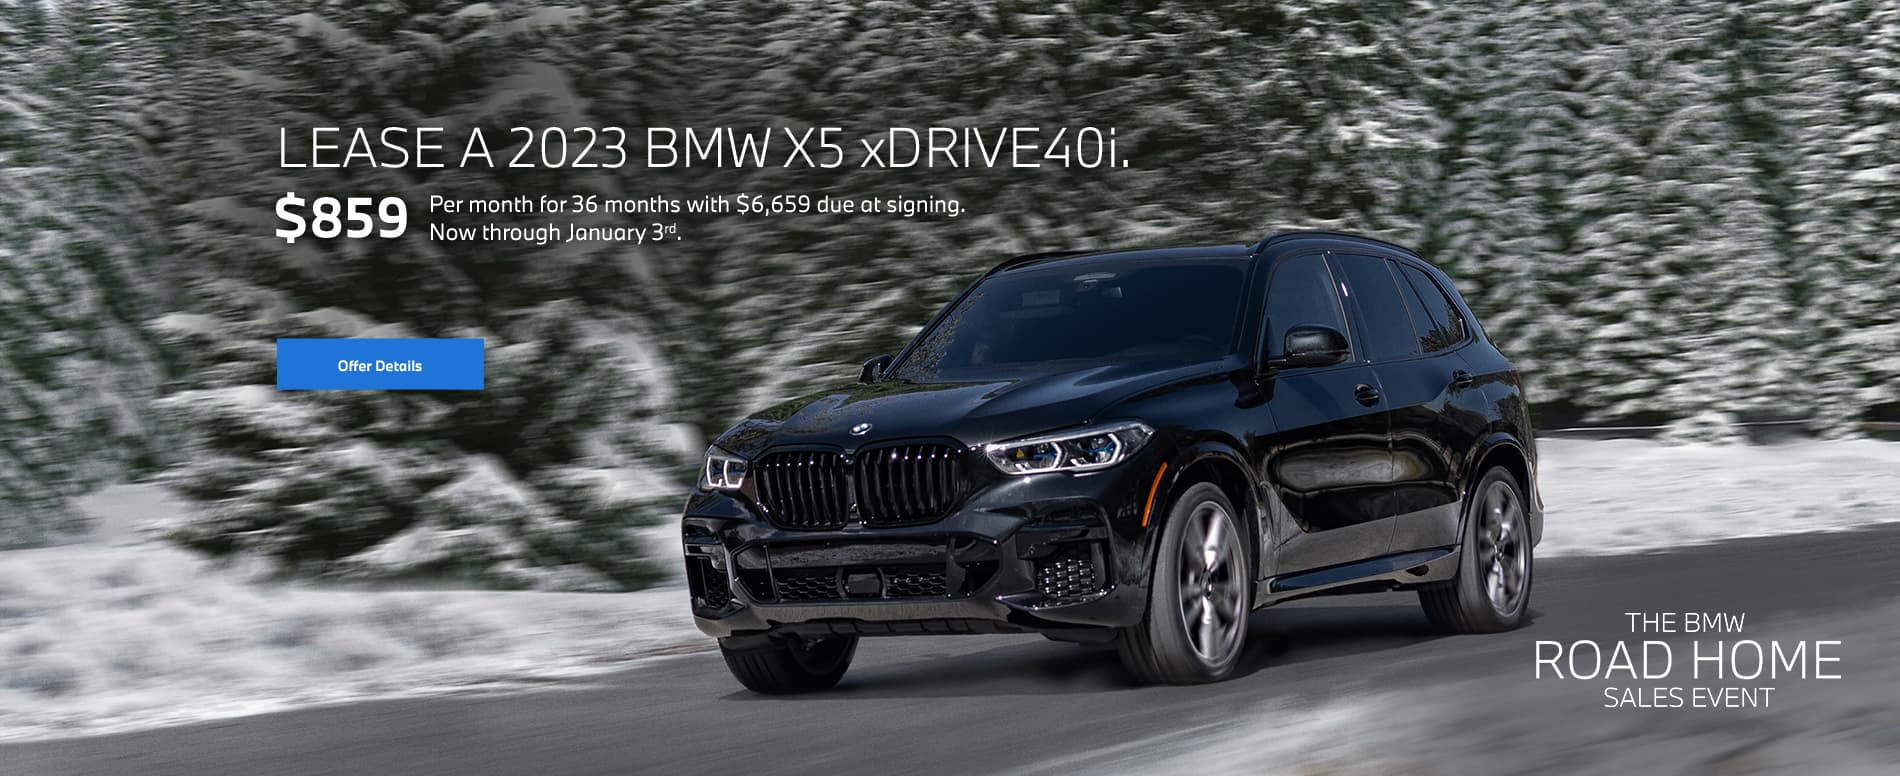 2023 X5 lease starting at $859 per month for 36 months